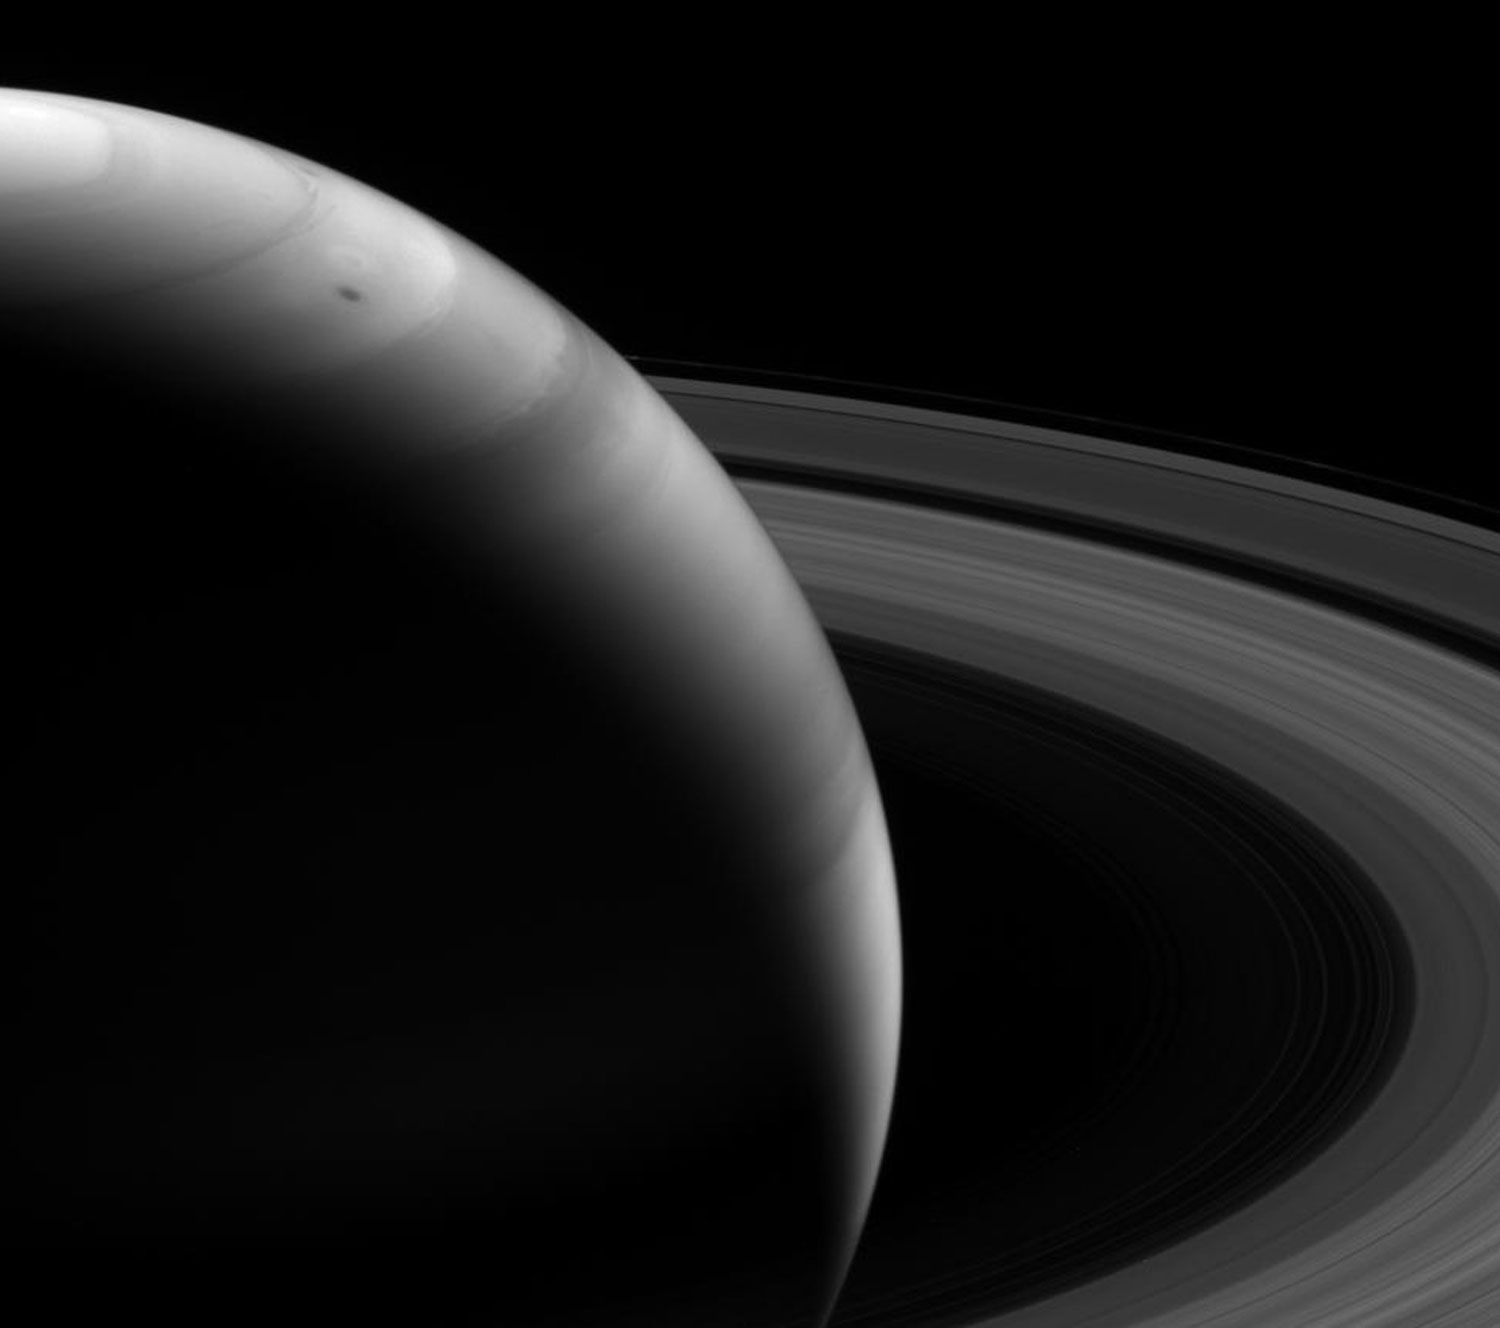 A view from the shadowed side of Saturn looking toward the sunlit side, taken by the Cassini spacecraft and released on Nov. 20, 2013. The picture was taken from about 18 degrees above the planet's ring plane.